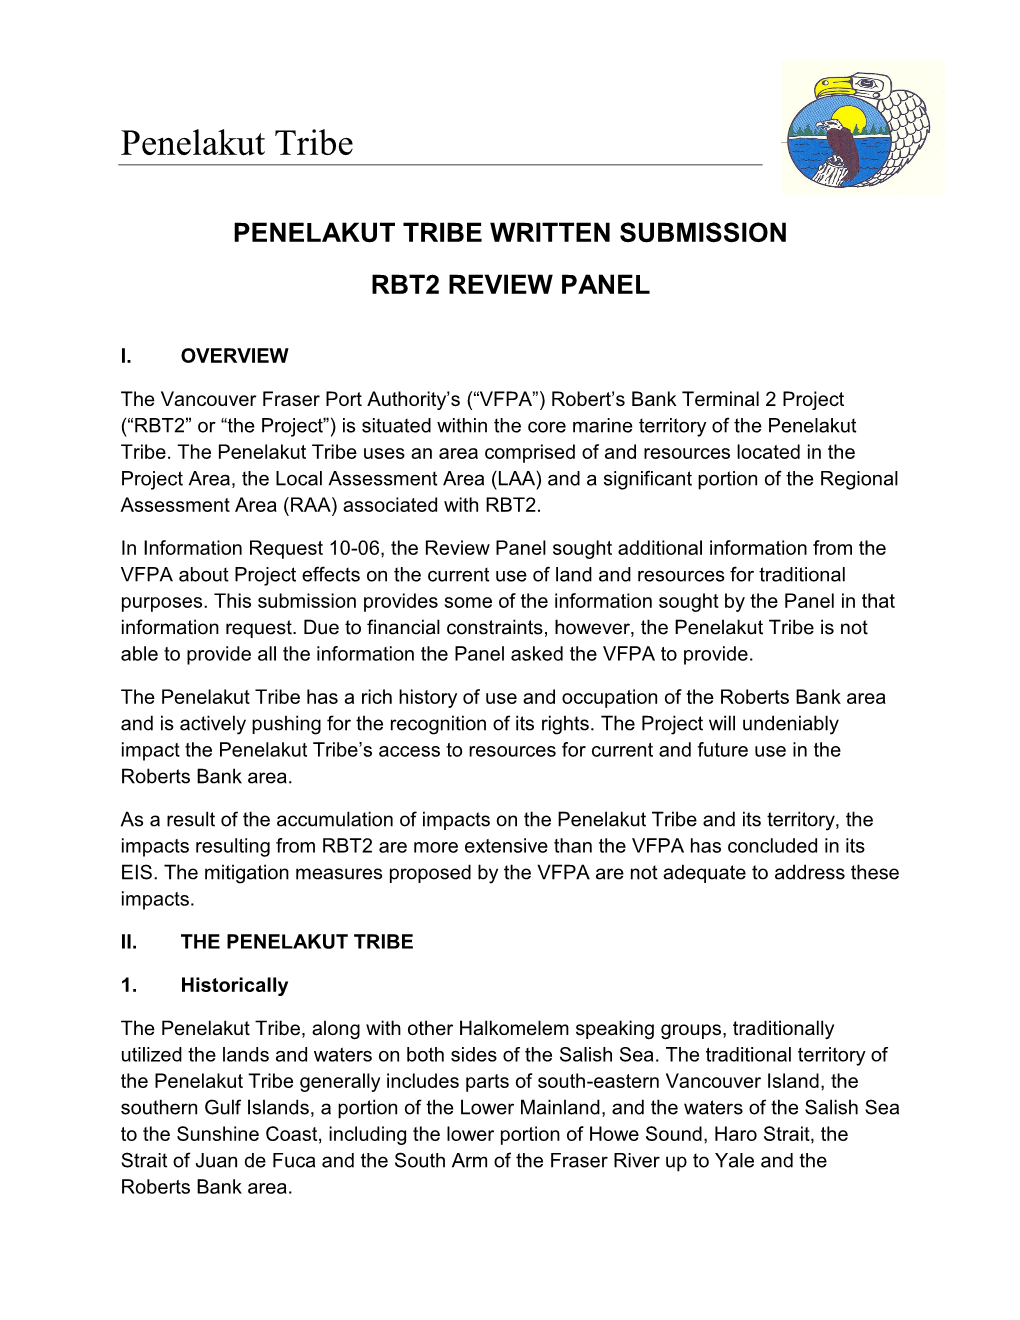 Penelakut Tribe Written Submission Rbt2 Review Panel